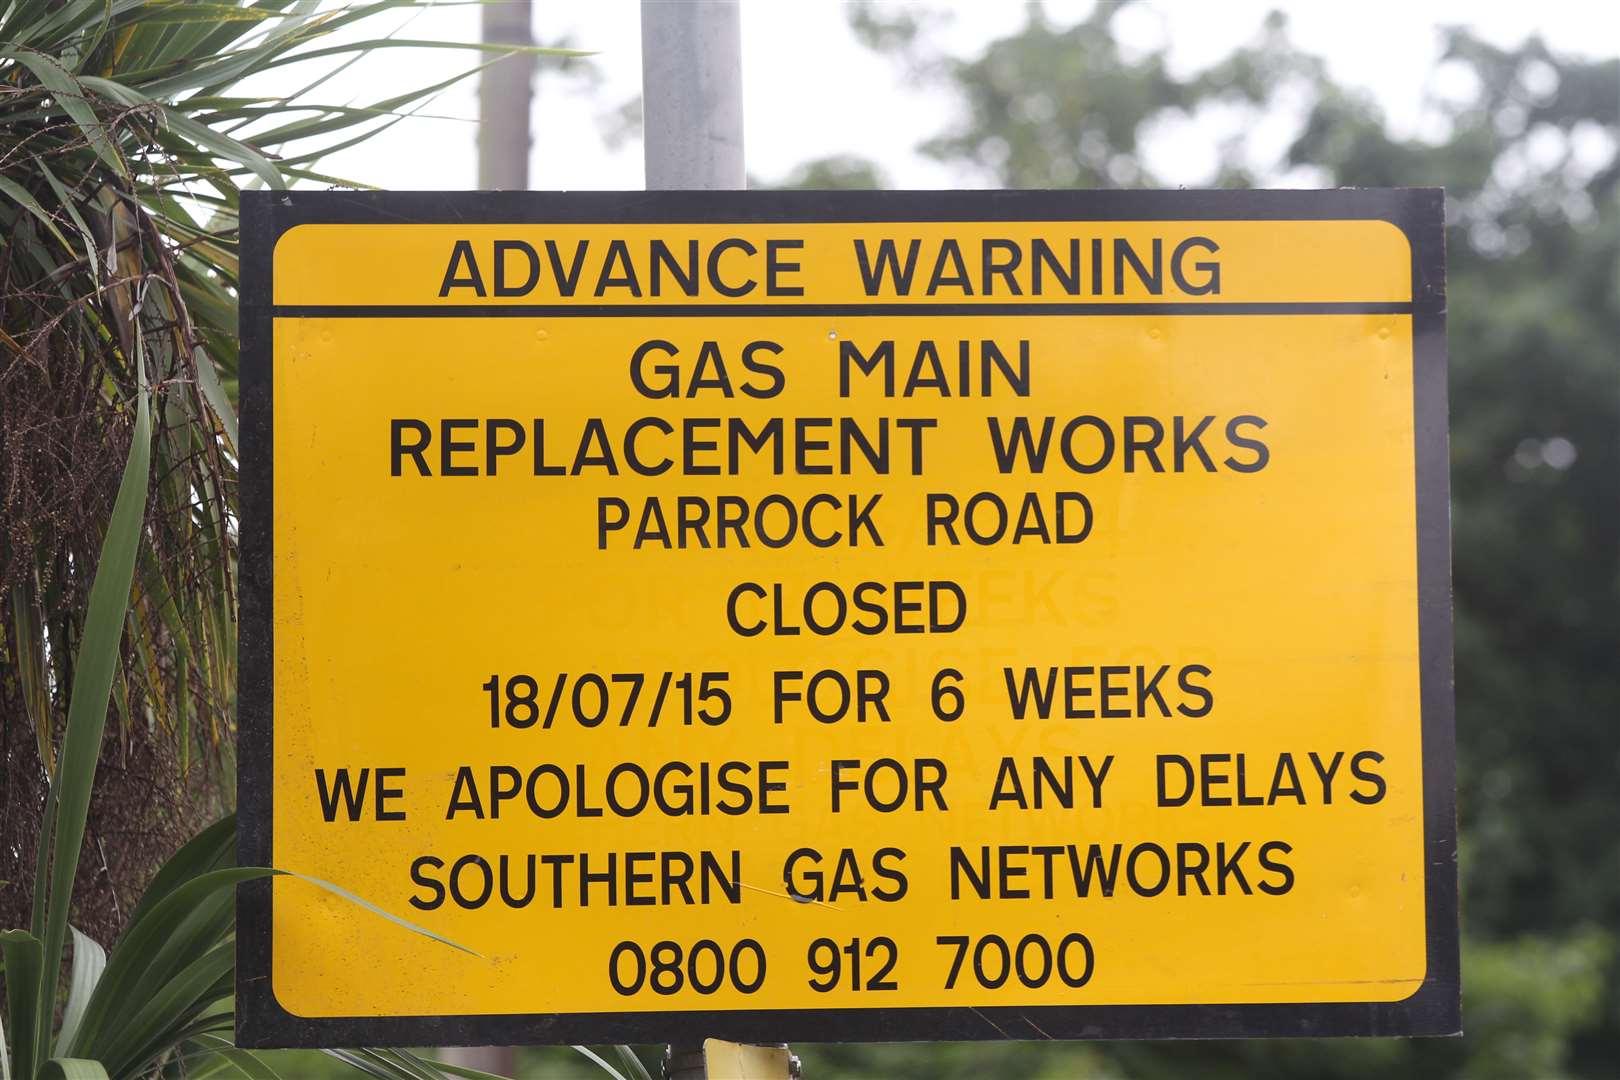 Sign spotted near Parrock Road